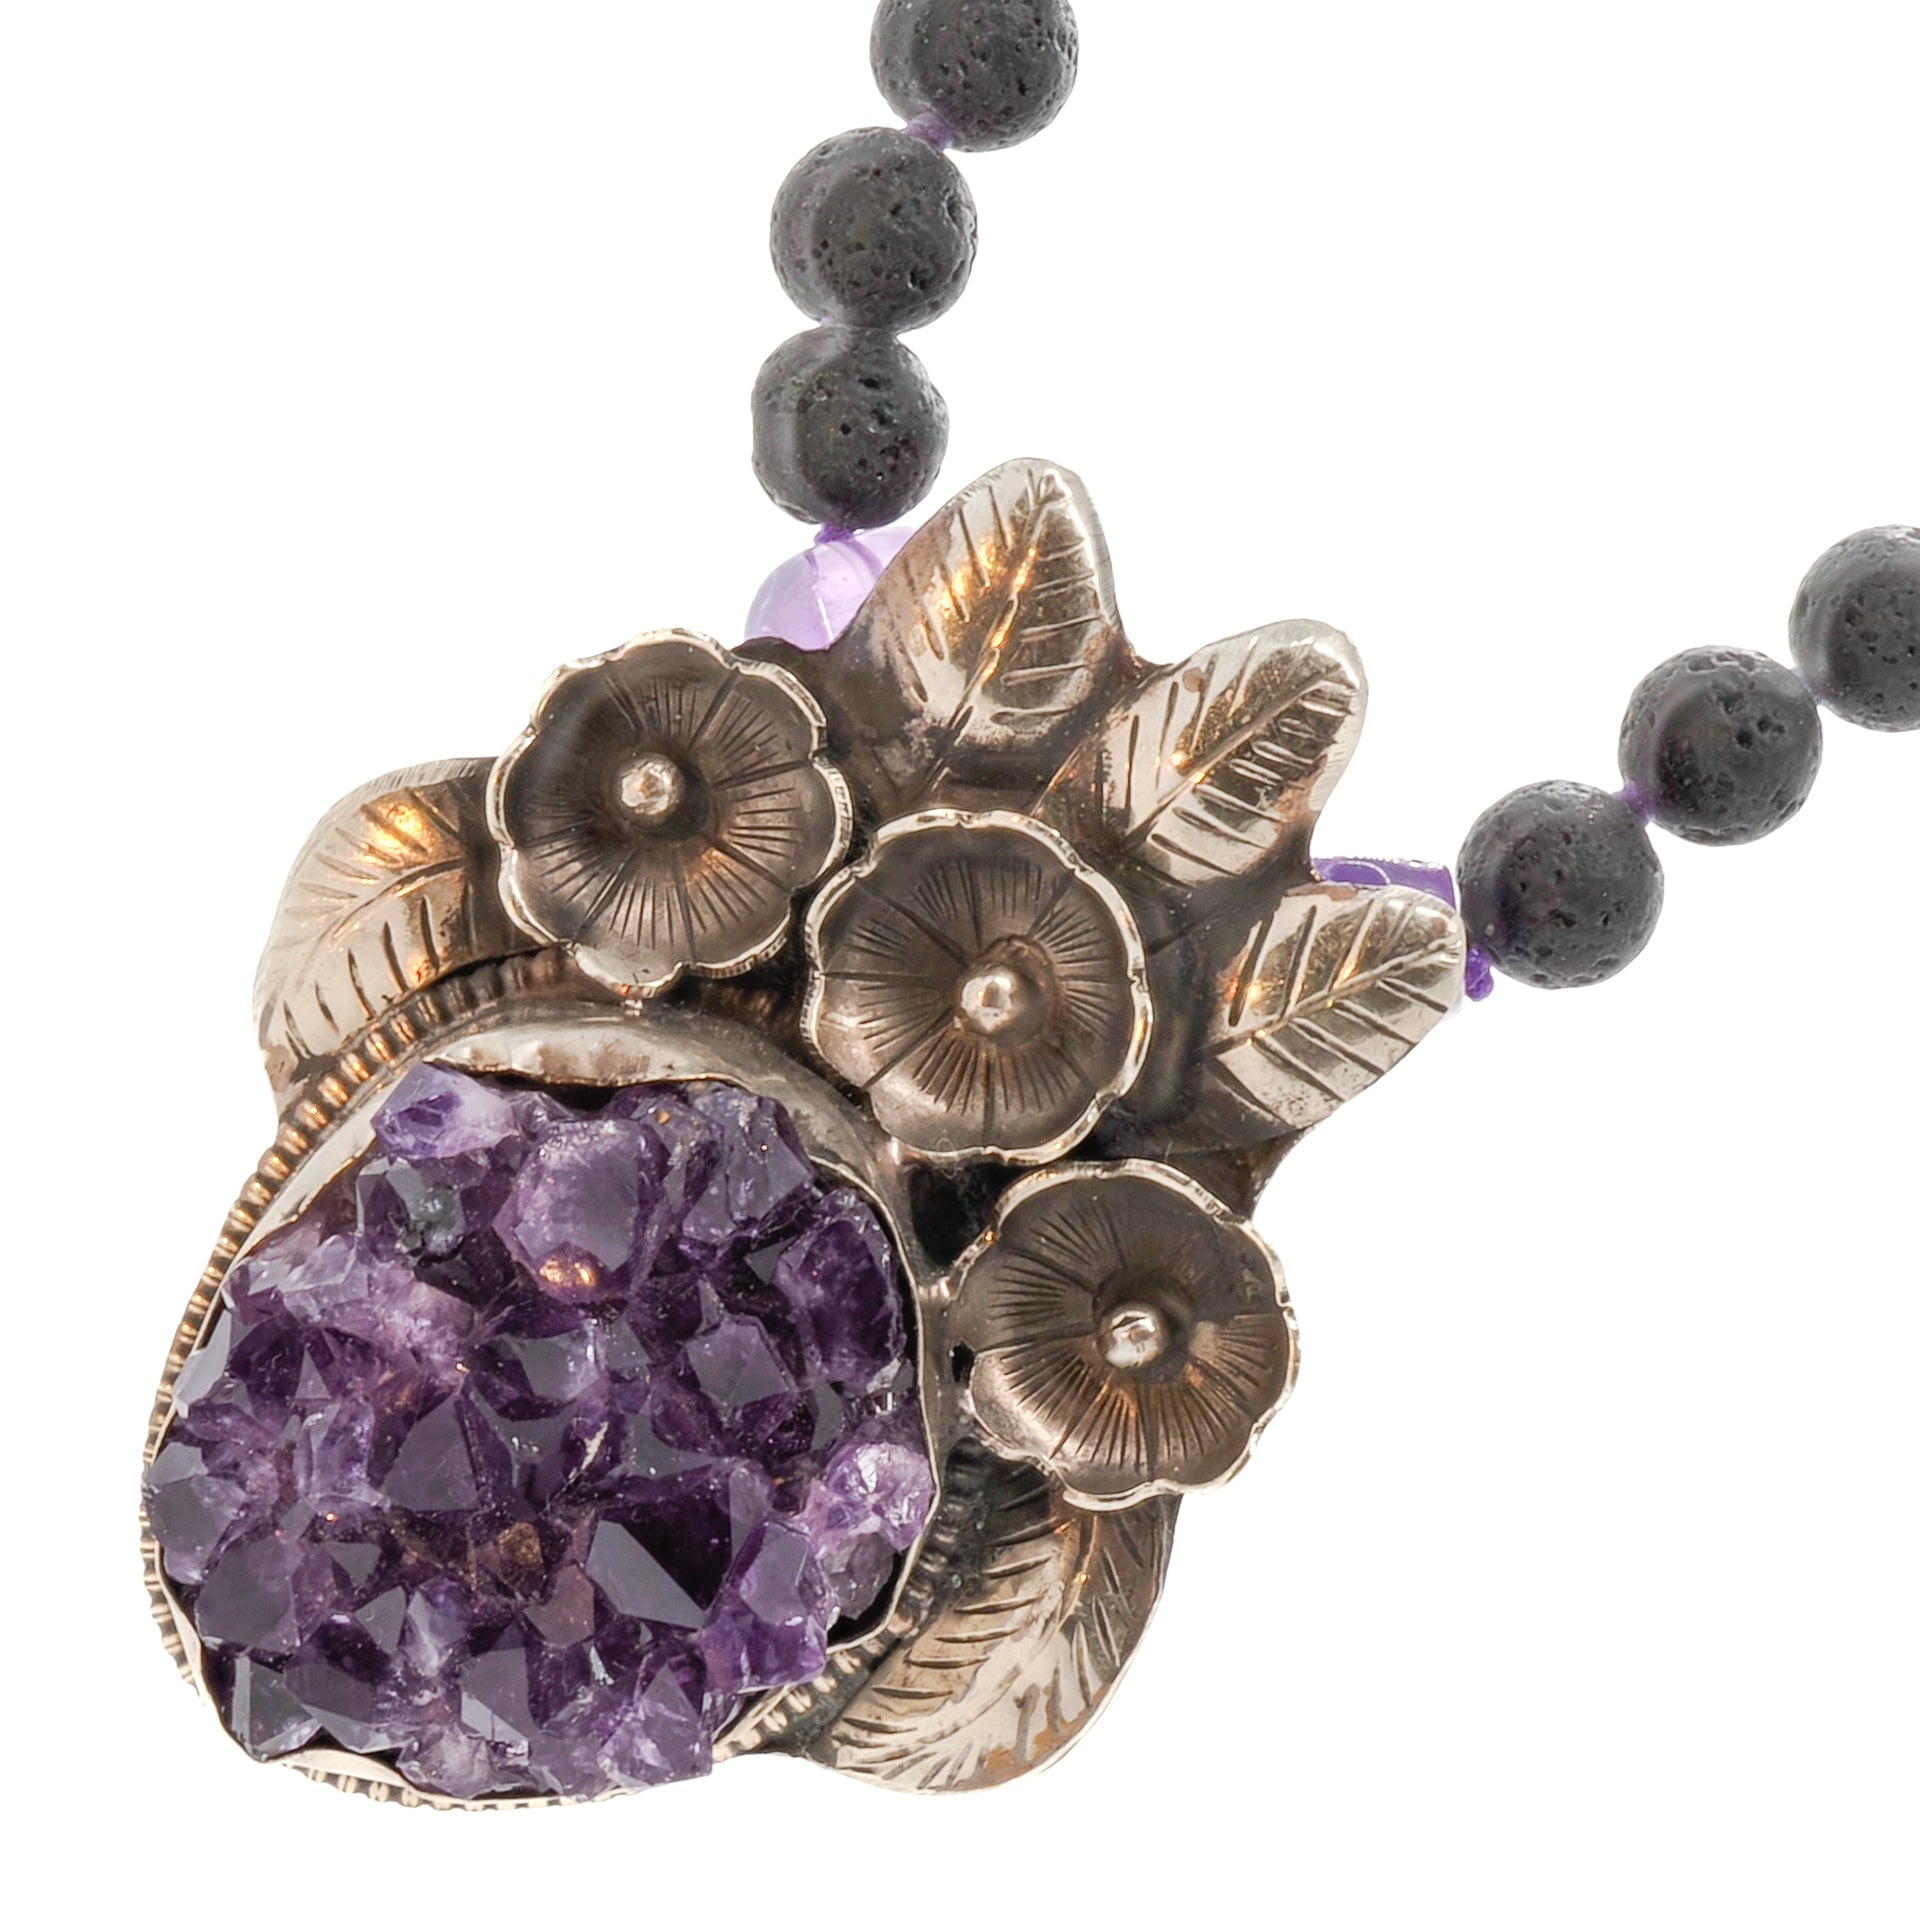 Necklace adorned with a gorgeous flower silver pendant and amethyst beads, promoting calmness and spiritual connection.